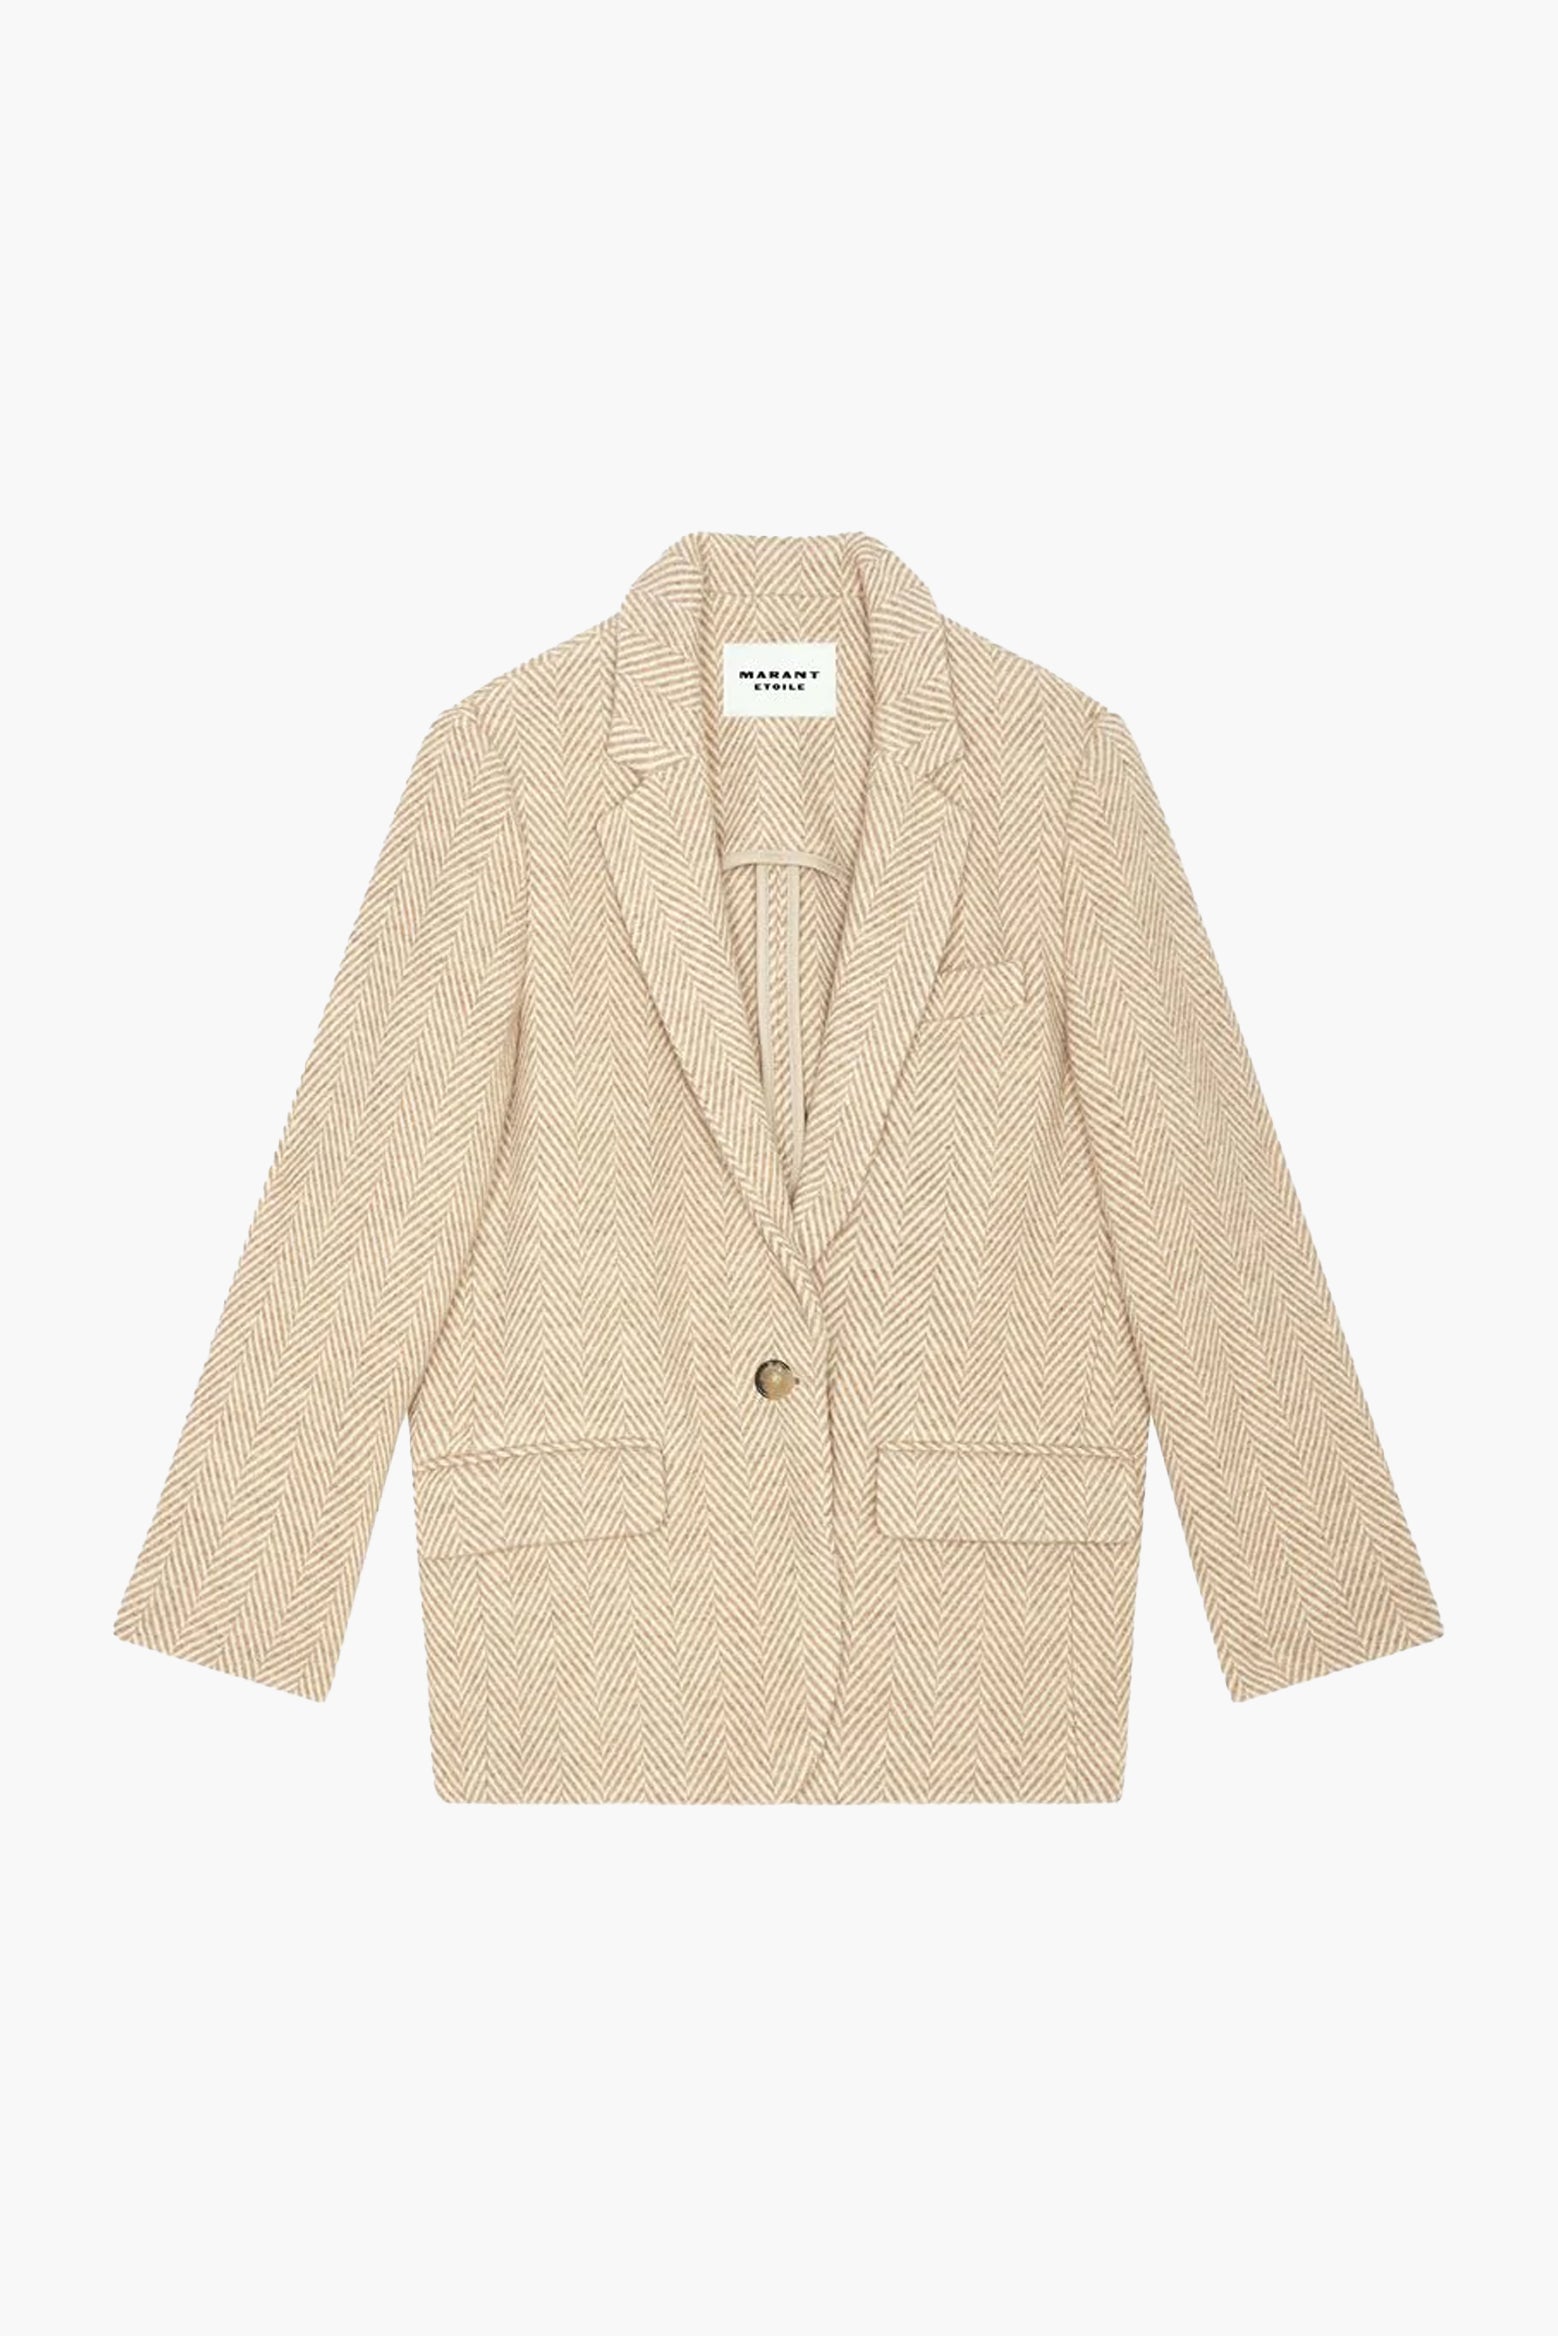 ISABEL MARANT Charlyne Jacket in Toffee | The New Trend Australia